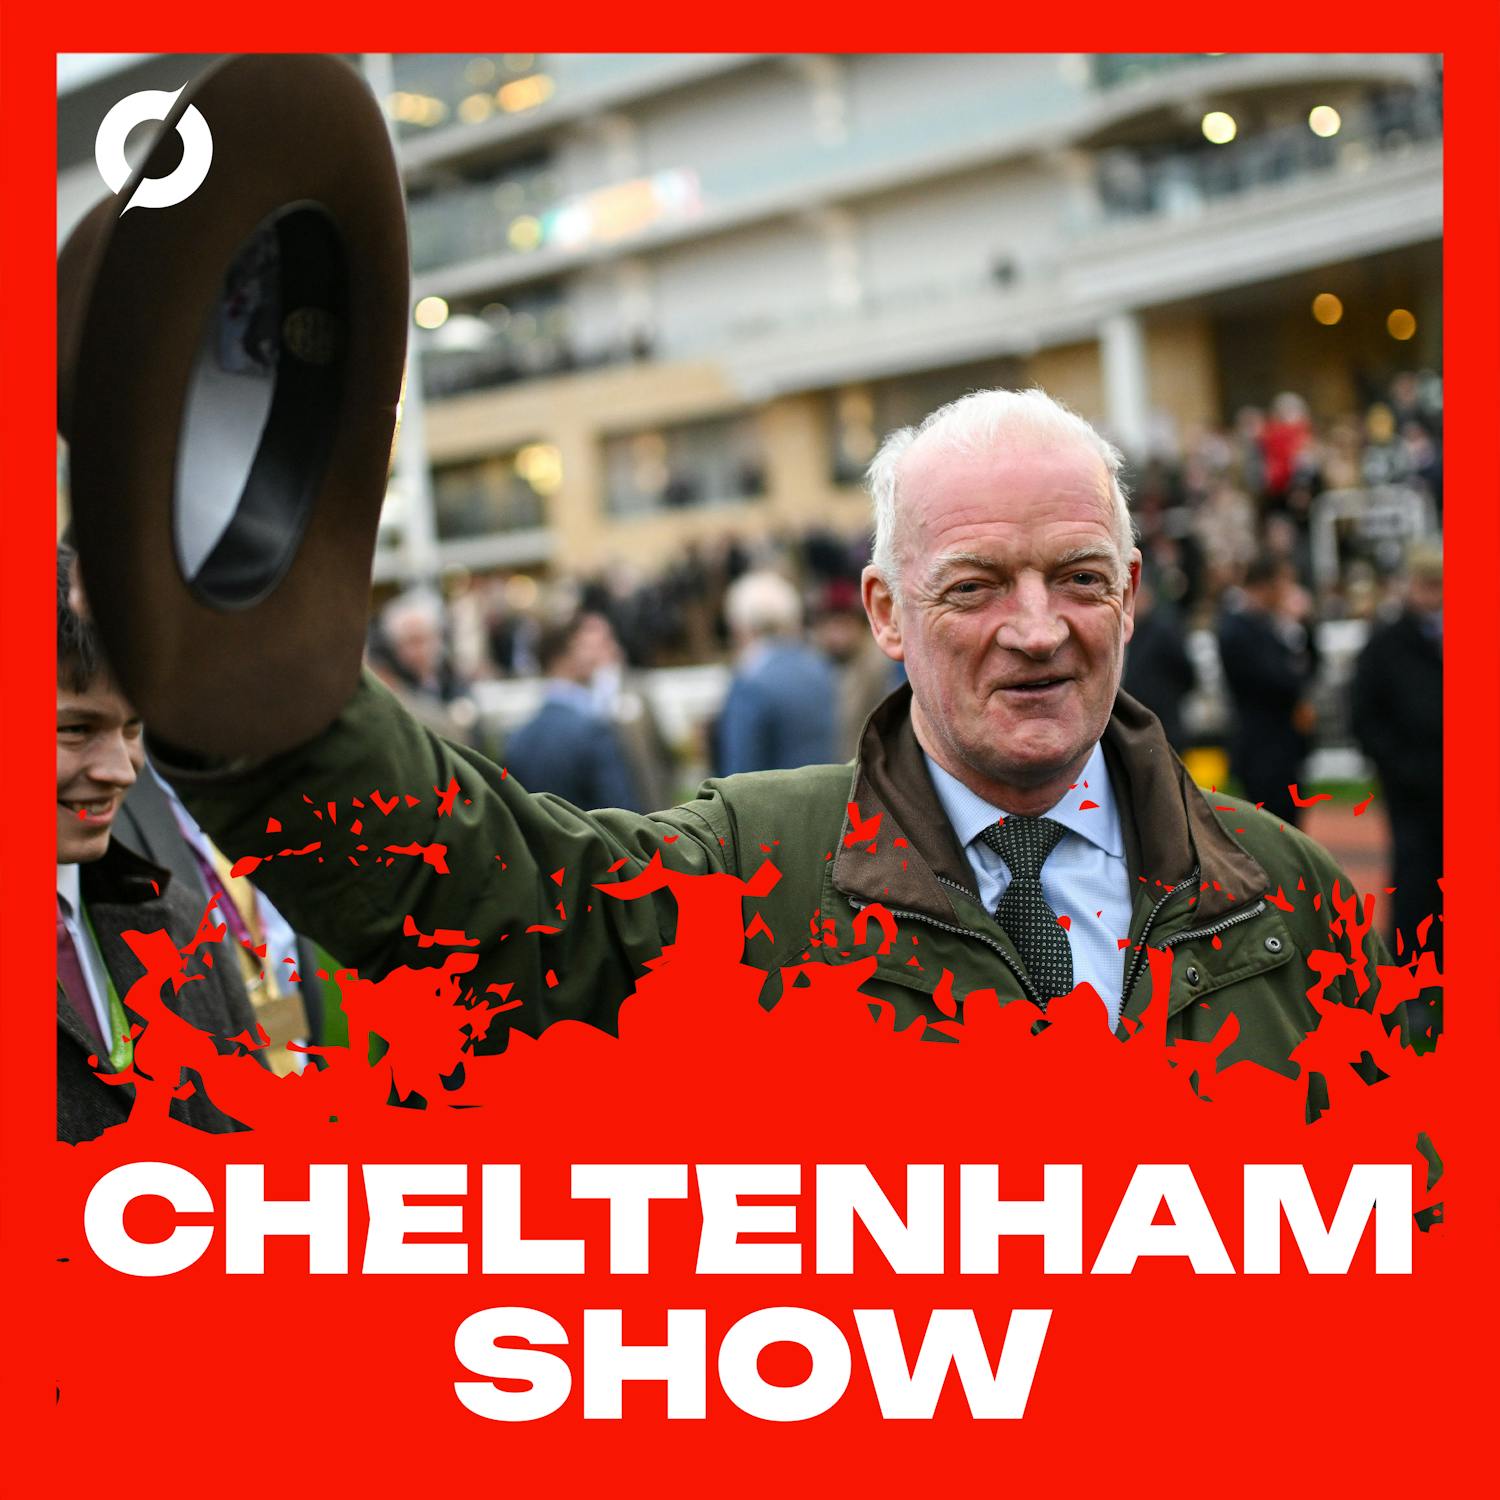 THE CHELTENHAM SHOW | The Stayers Hurdle, attendance atmosphere & Day Three picks!